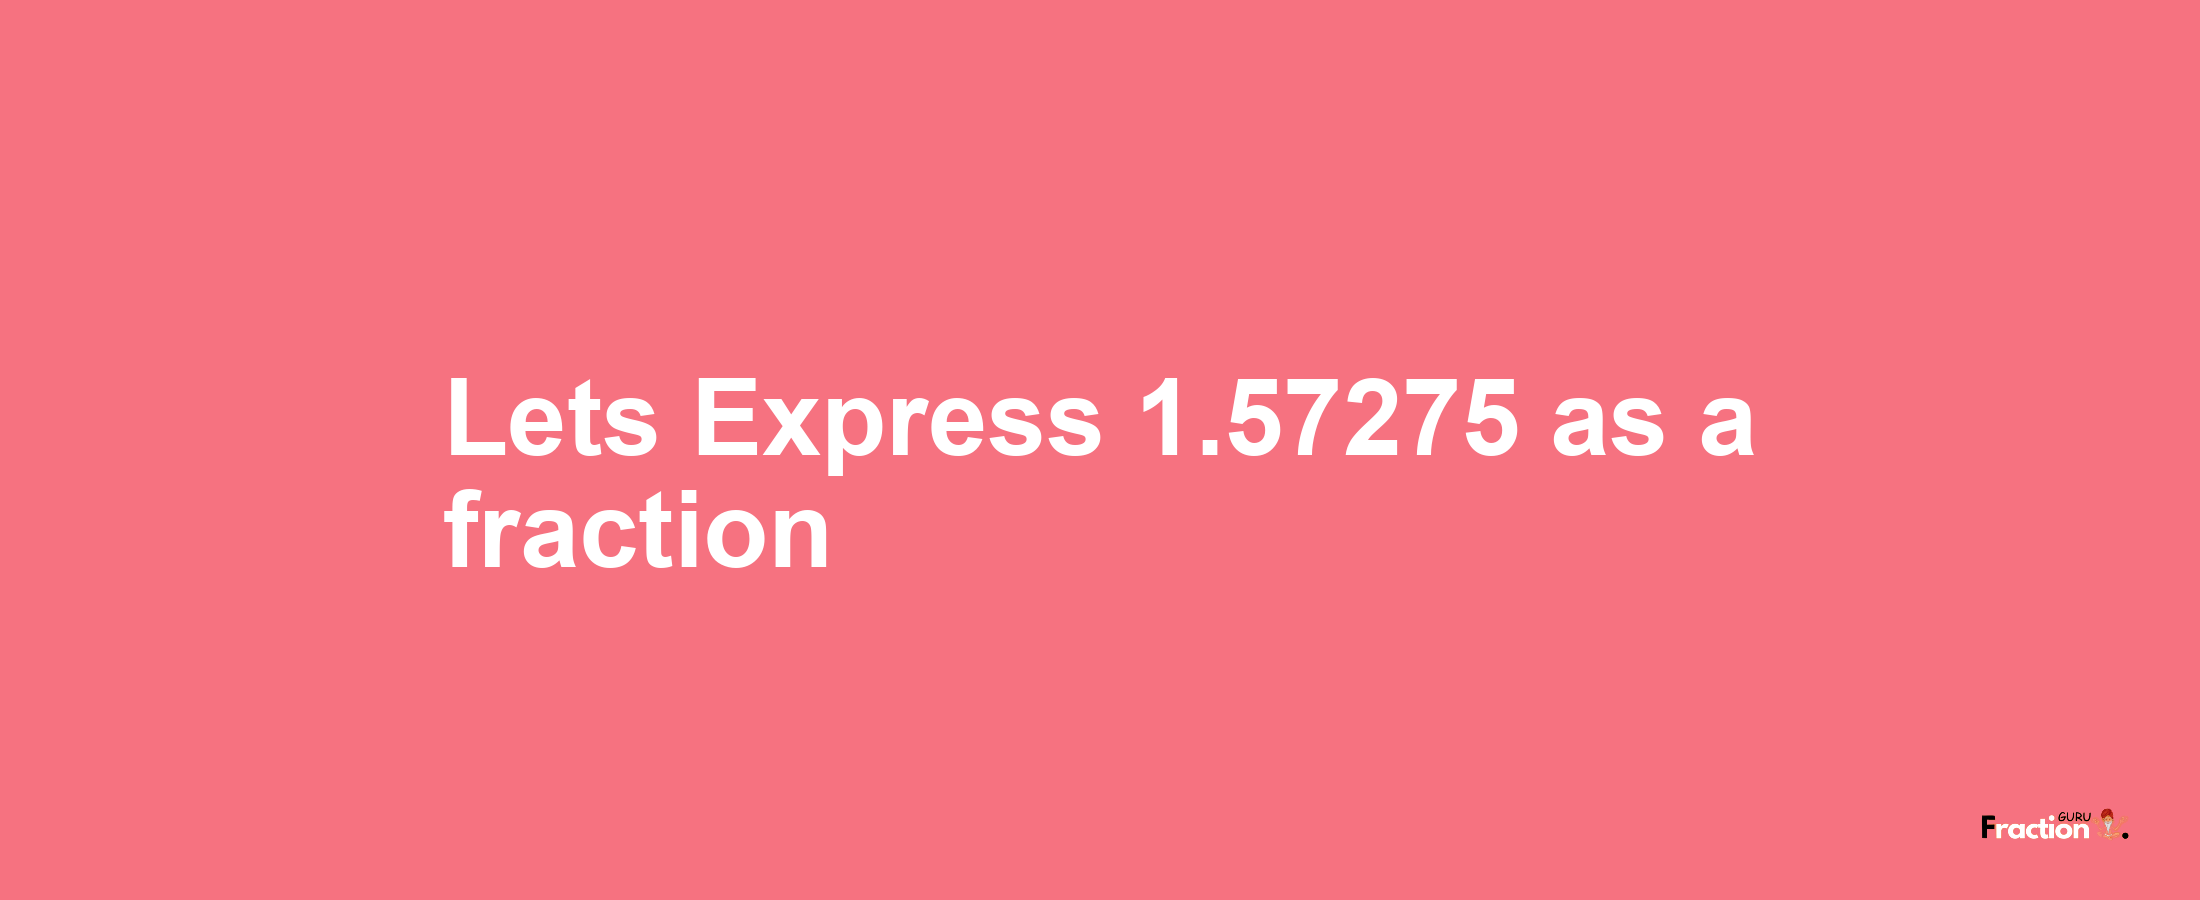 Lets Express 1.57275 as afraction